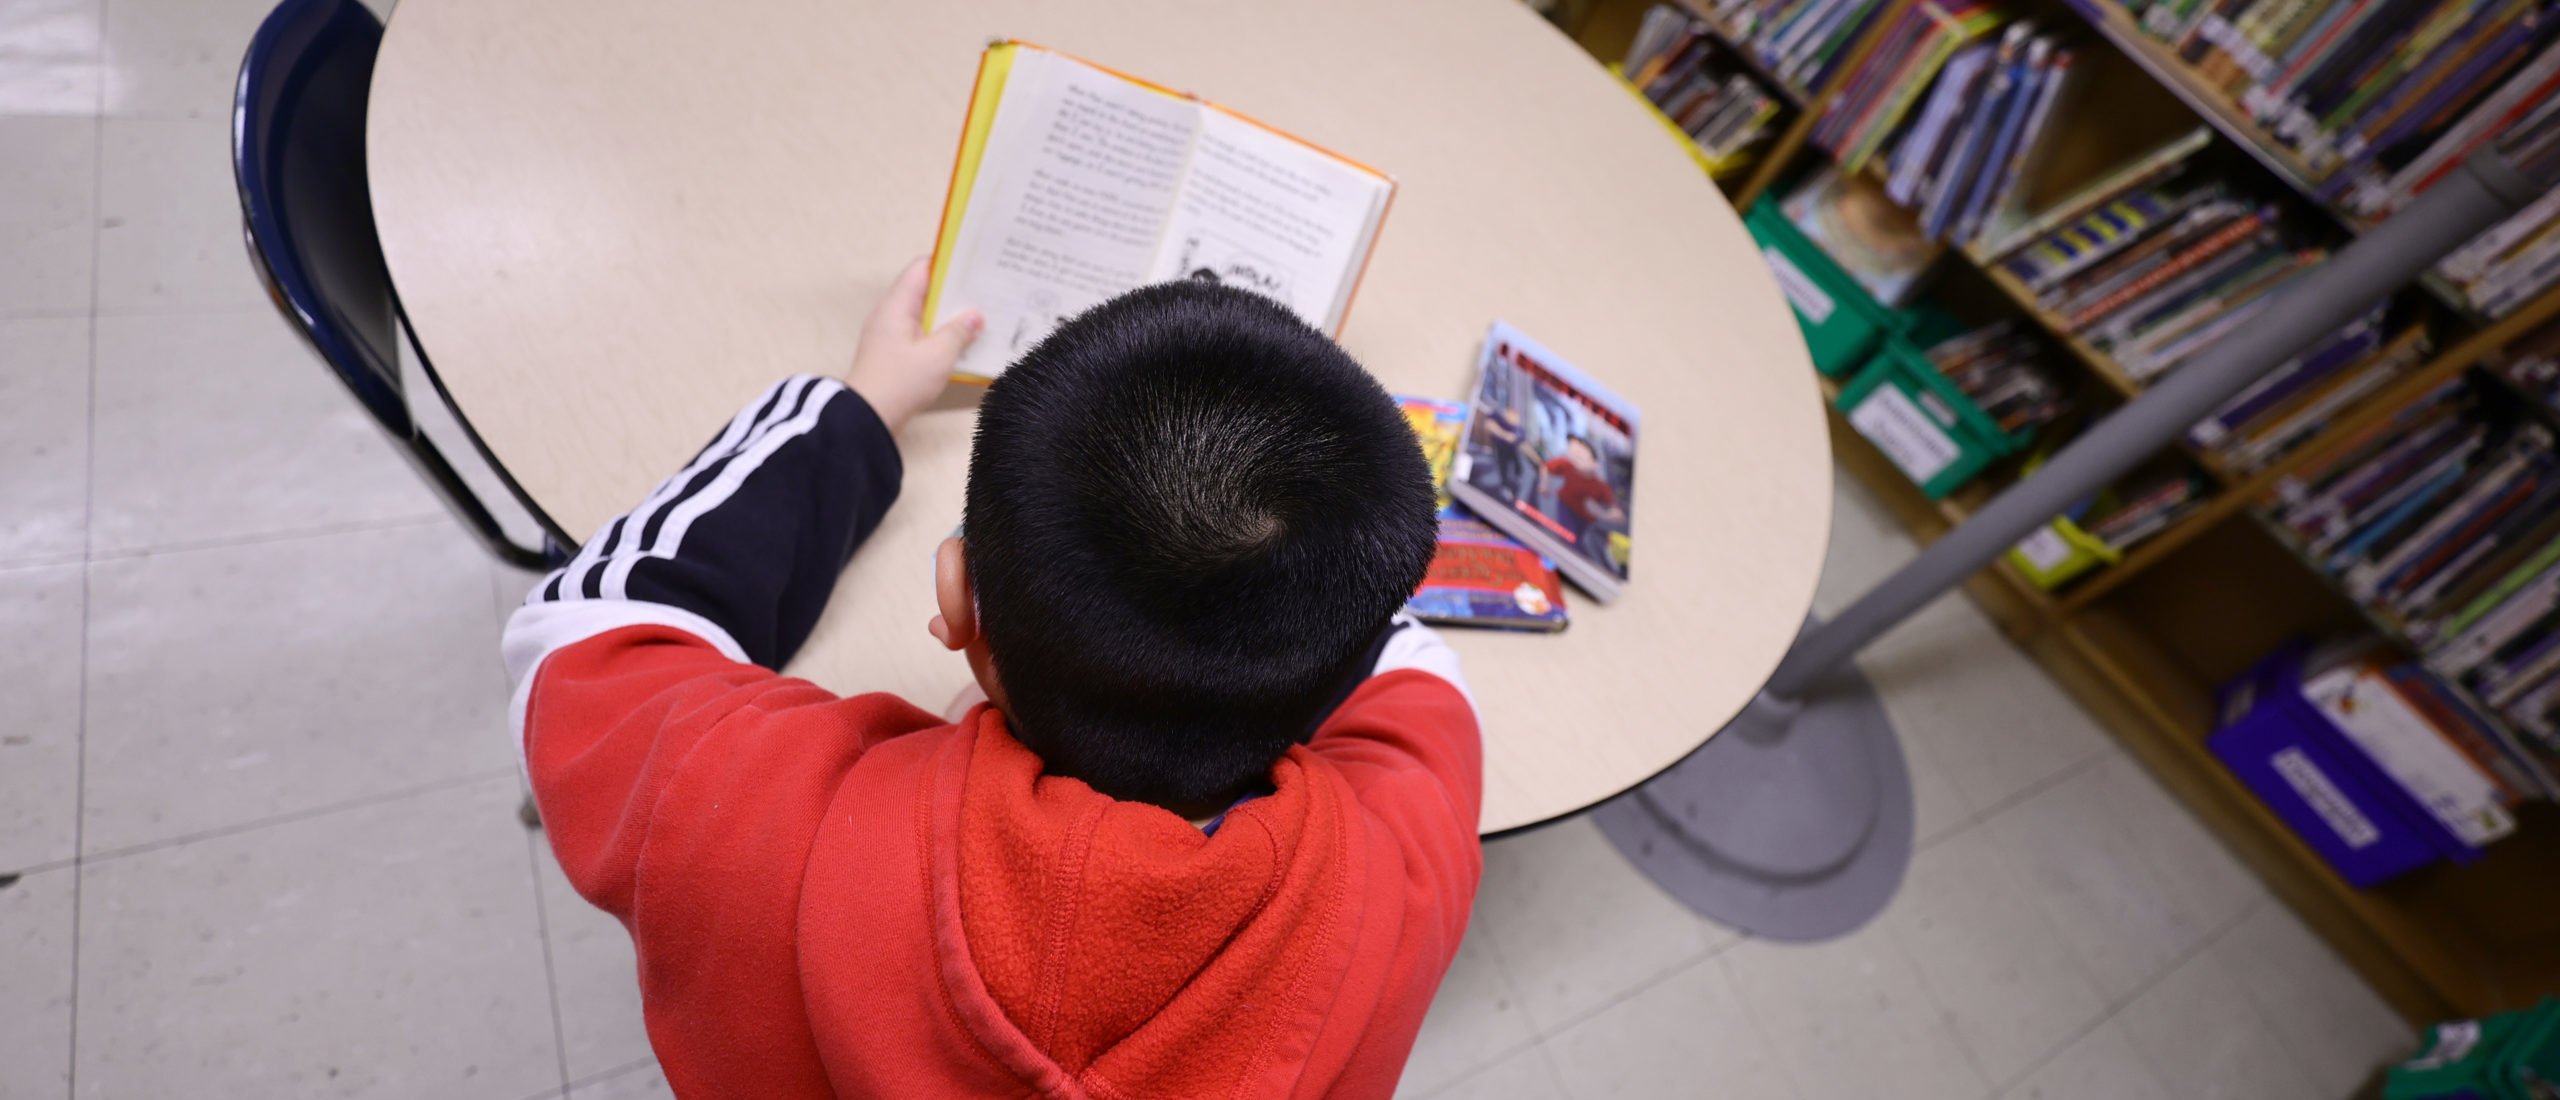 A student in the library reads a book after receiving candy and a red envelope in a cultural celebration of the Lunar New Year at Yung Wing School P.S. 124 on February 02, 2022 in New York City. NYC schools were closed yesterday in observance of what is considered the most important day in the Chinese calendar with the start of the New Year. This event is not only relevant in Asia, but also in other countries where this Chinese tradition is respected and celebrated and is on the table to become the next US Federal Holiday. (Photo by Michael Loccisano/Getty Images)